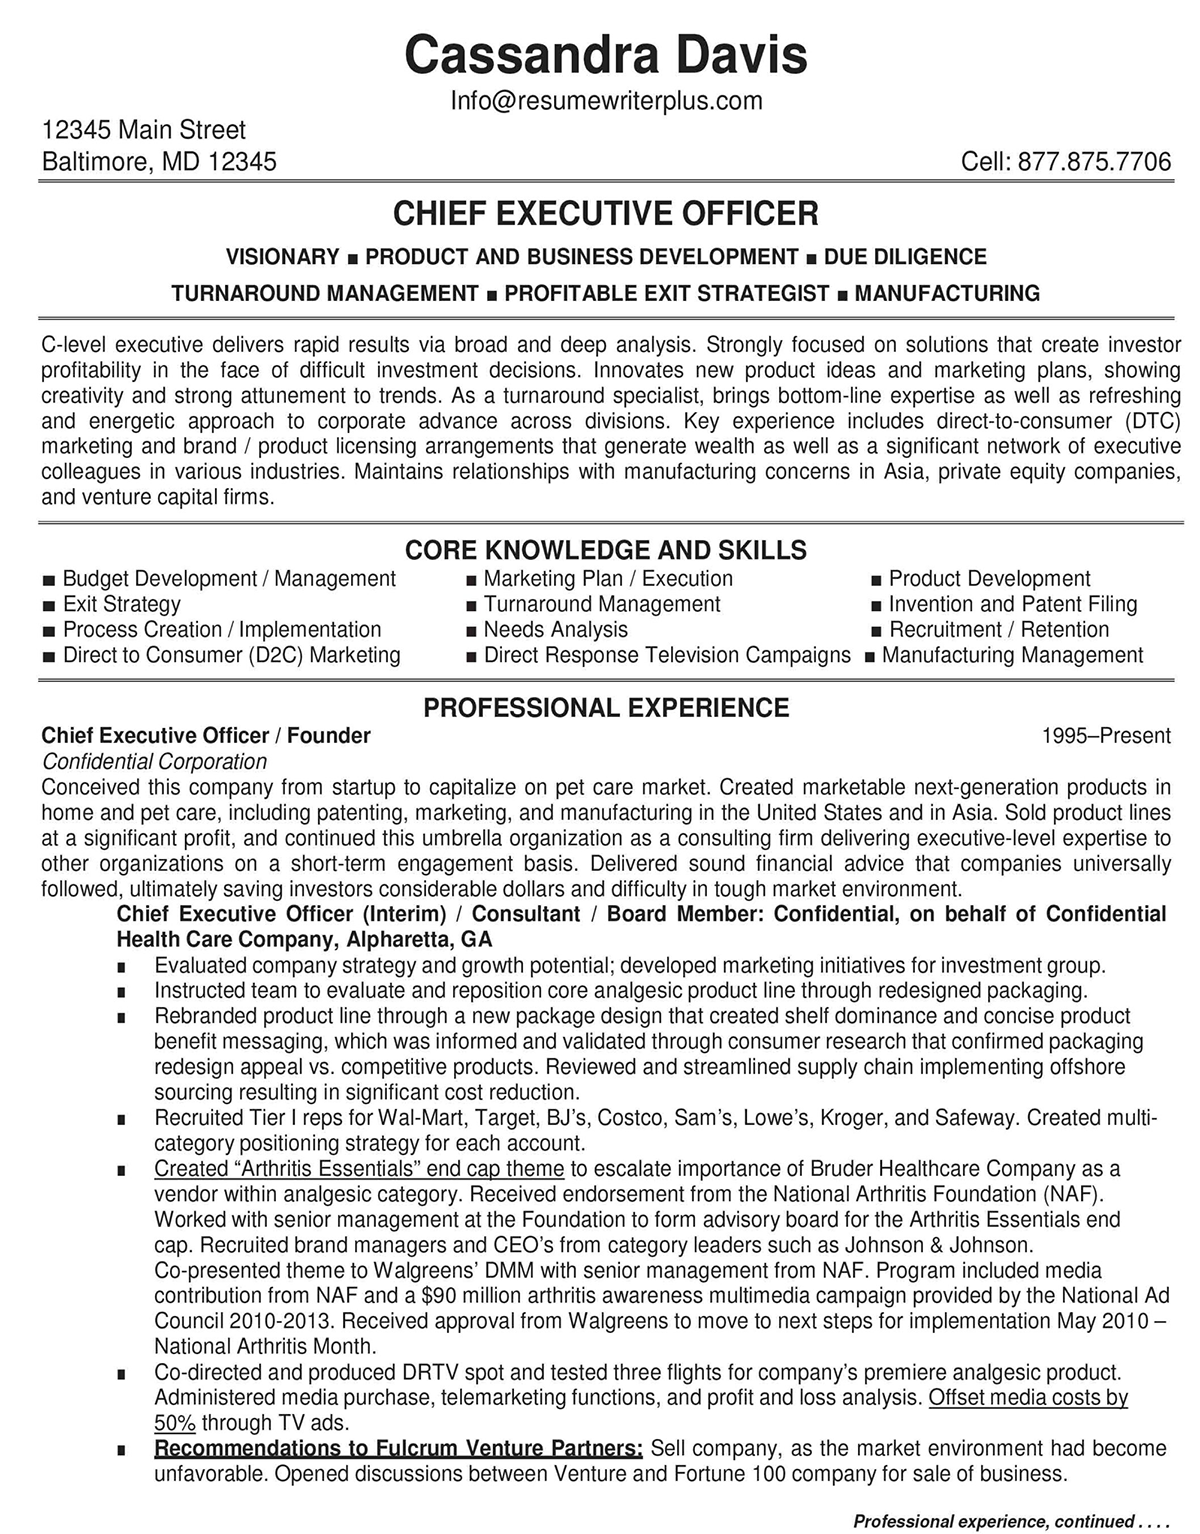 Chief-Executive-Officer-Resume-1